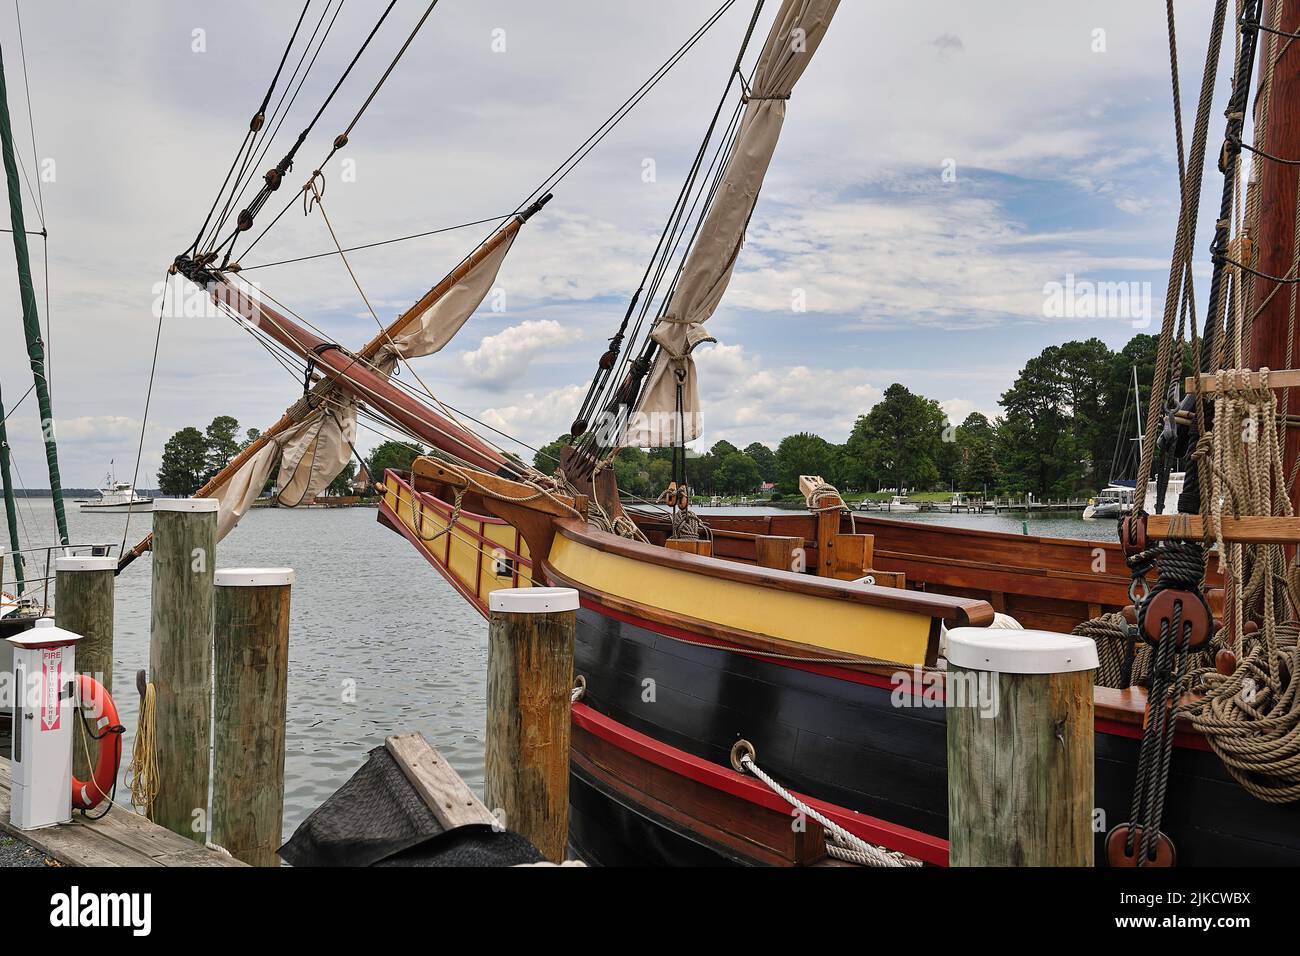 The New Maryland Dove, an historic reproduction of the Dove, sits dockside at the Chesapeake Bay Maritime Museum in St. Michaels, Maryland USA. Stock Photo